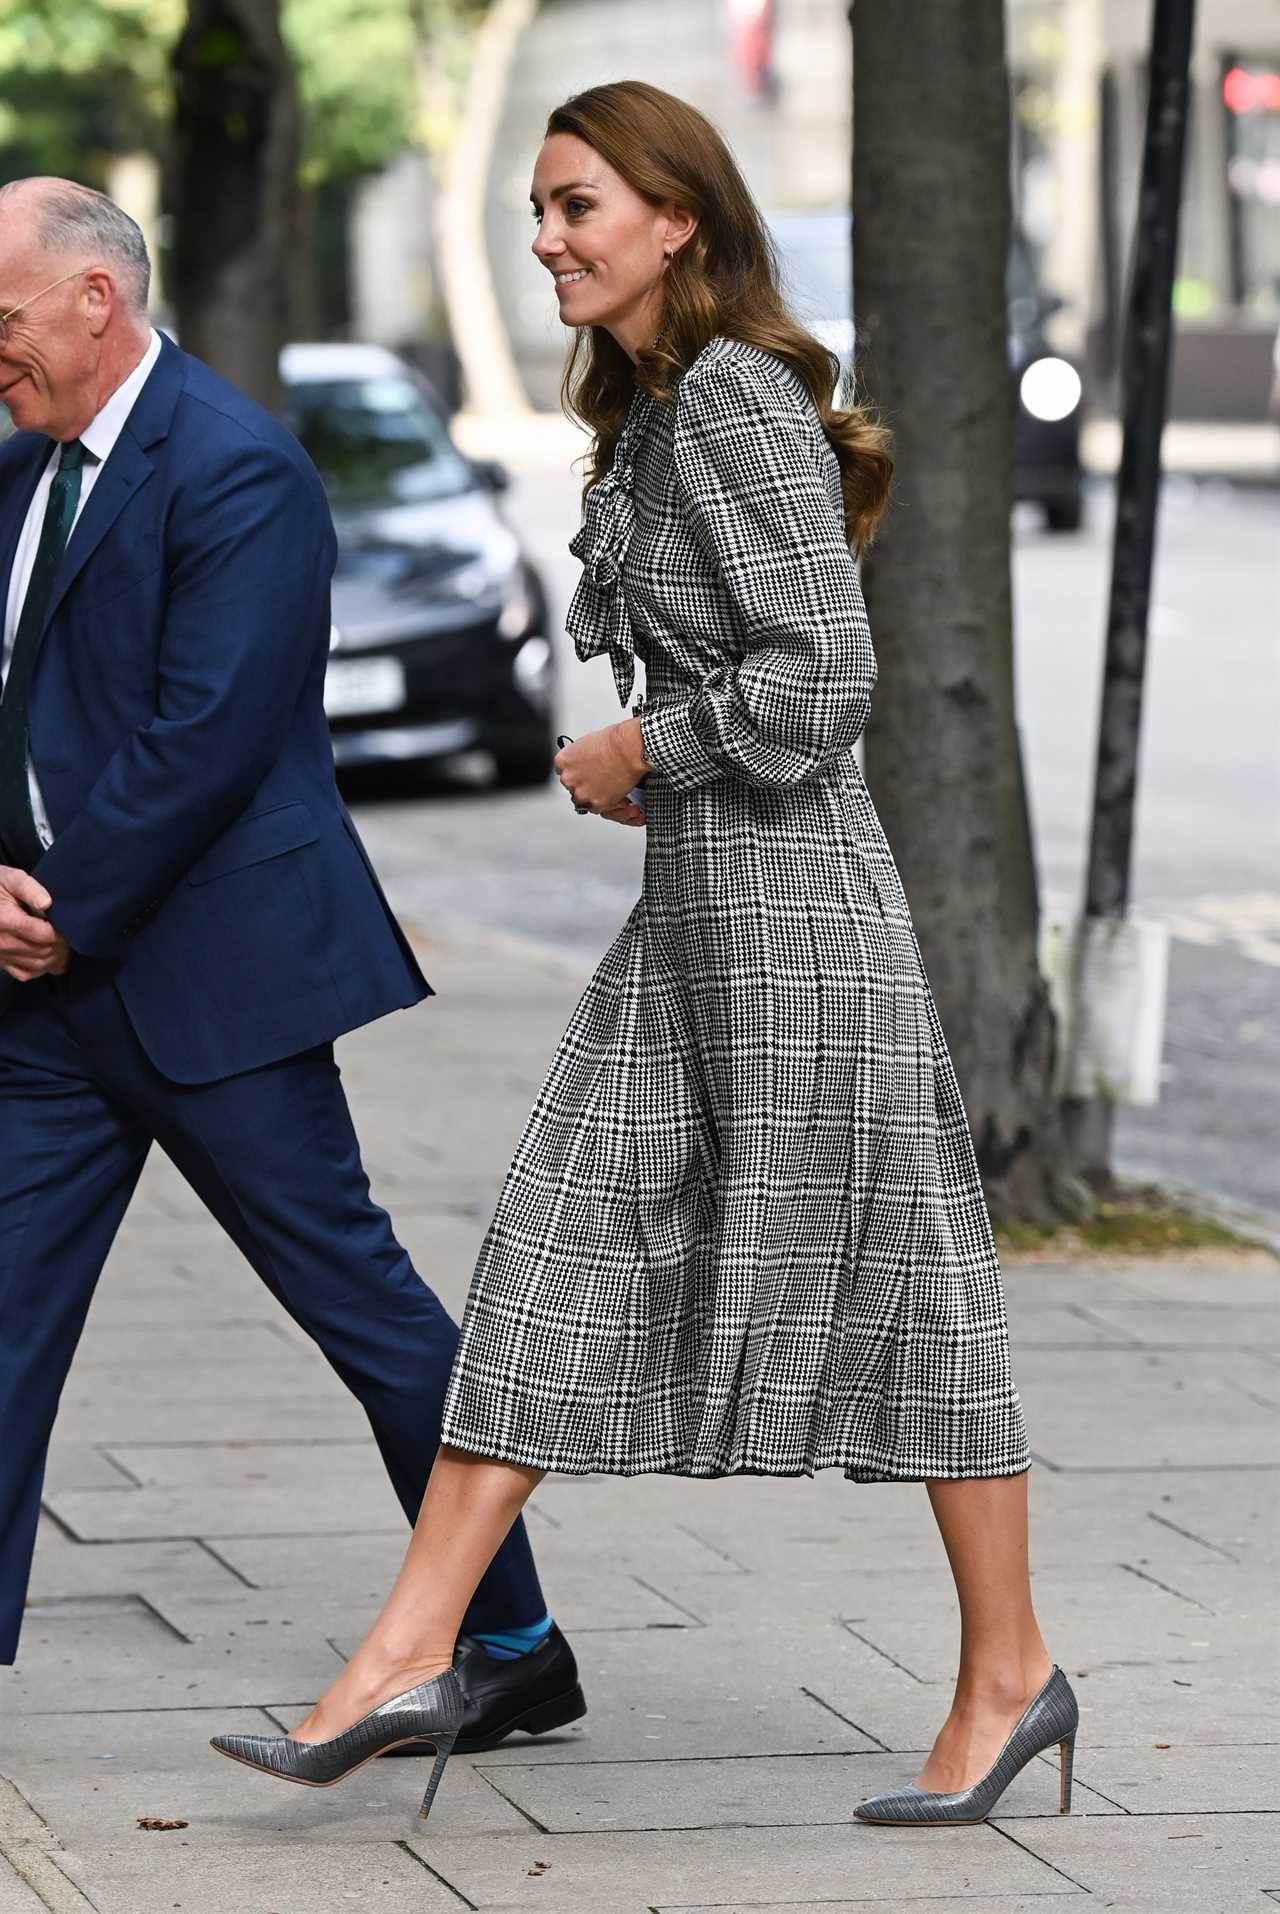 Kate recycled a £16 Zara dress for the event